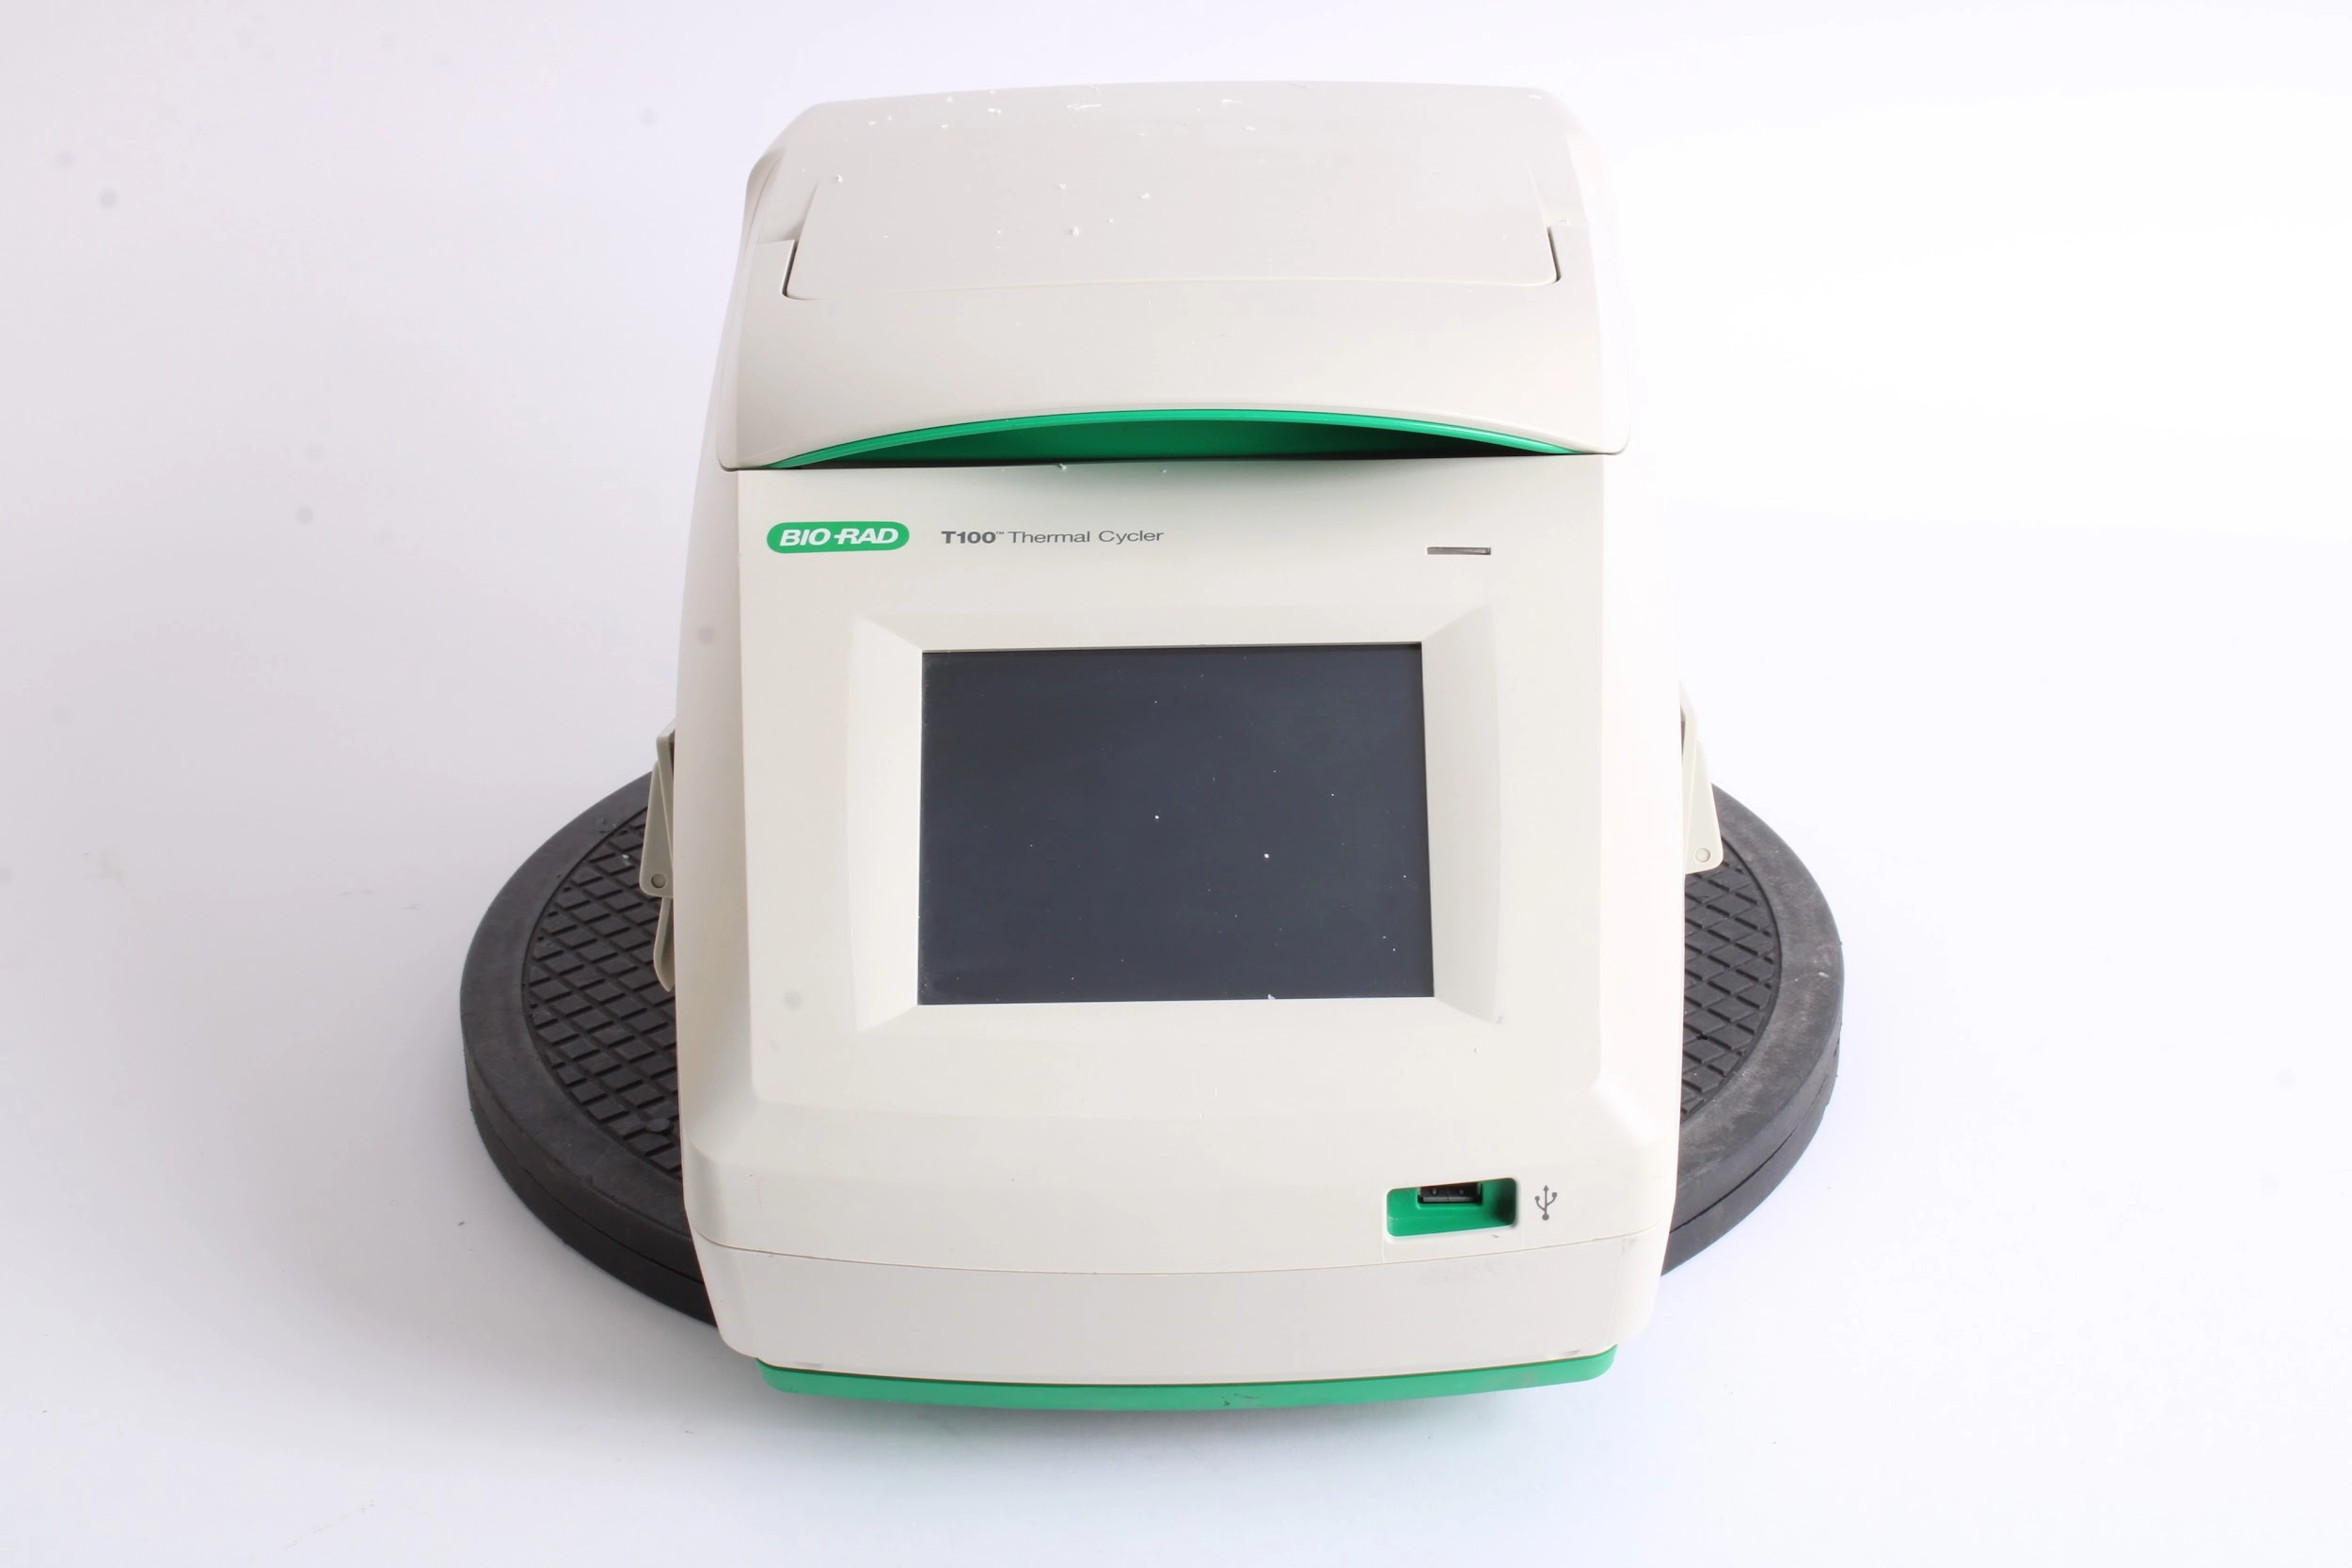 Bio Rad T100 Thermal Cycler / Touch Screen / Compact Lab Equipment